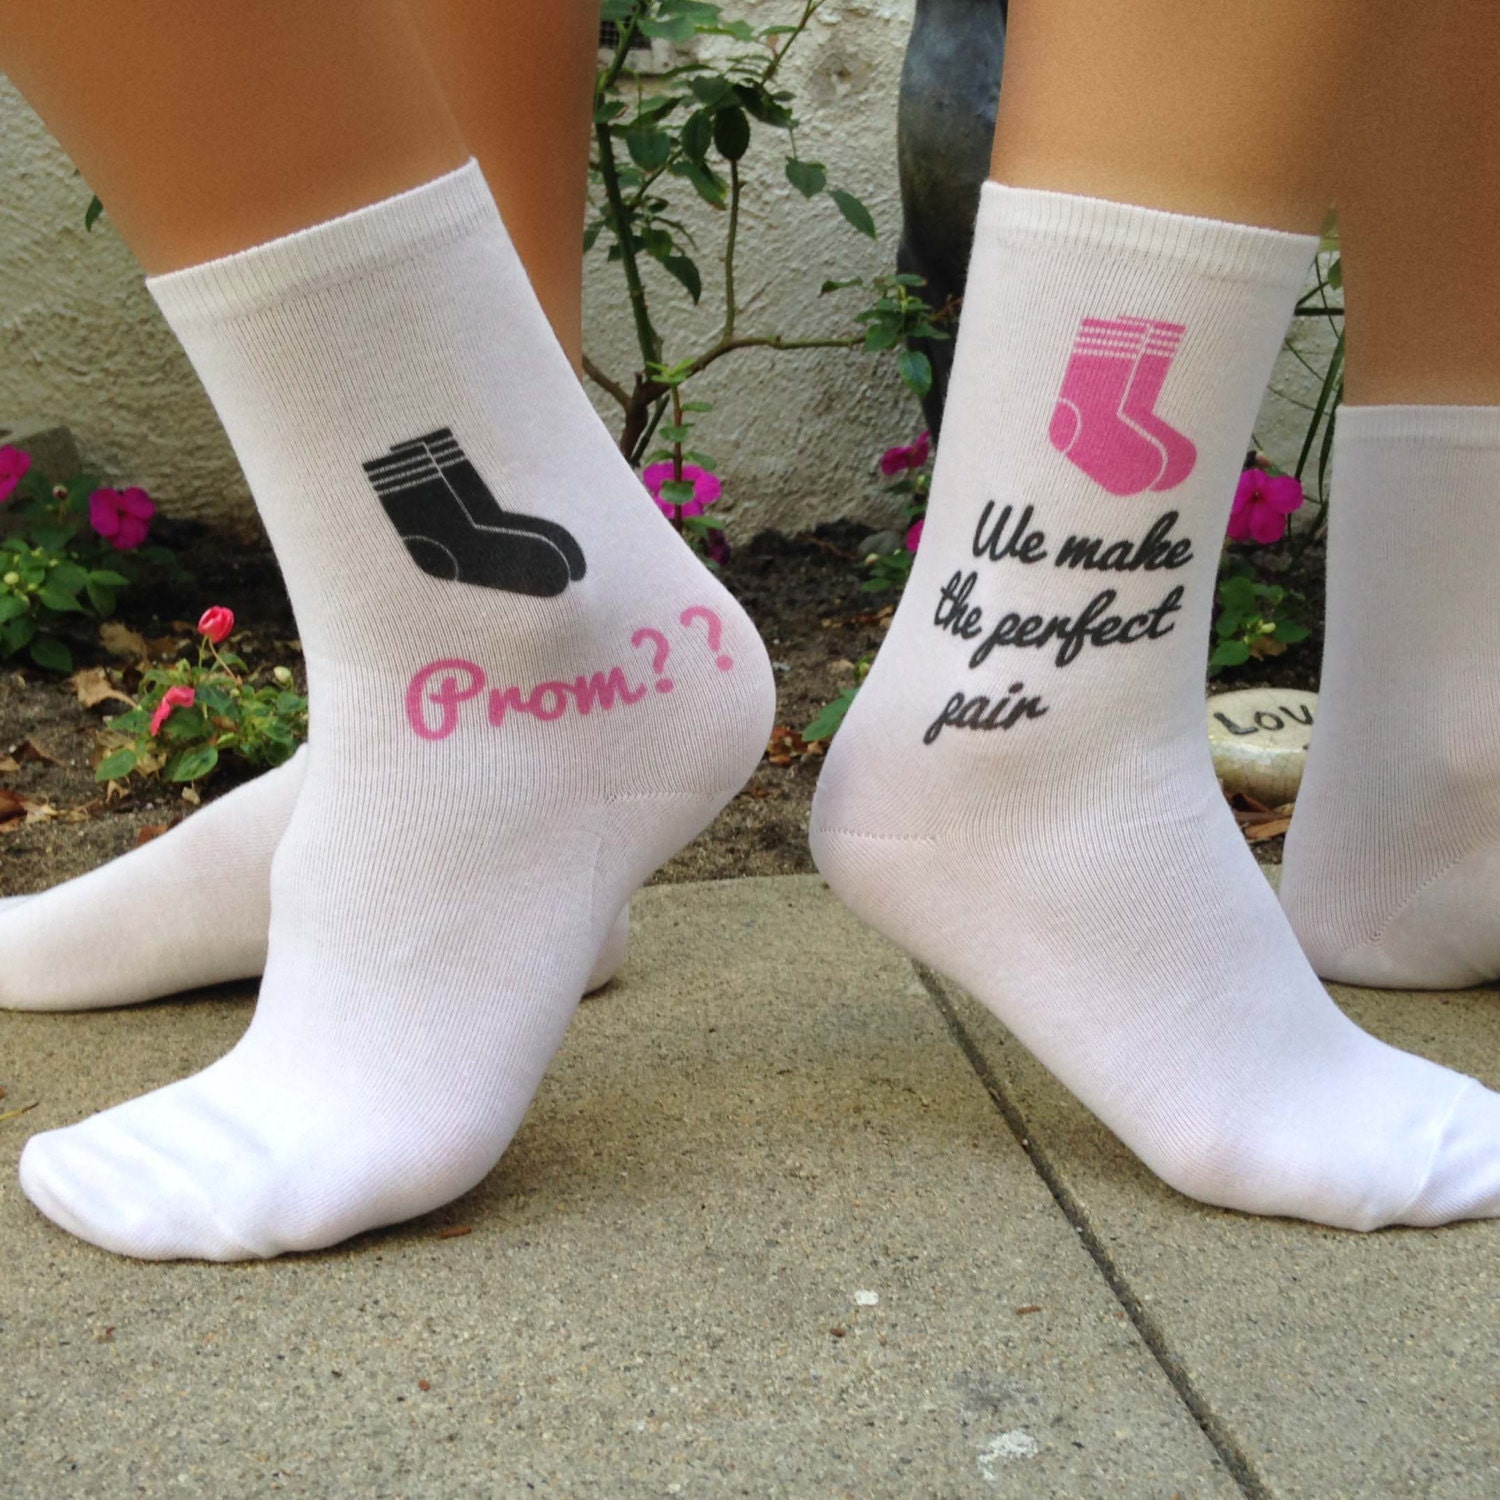 Promposal Socks Prom Date Homecoming Ask To by SockprintsOnEtsy